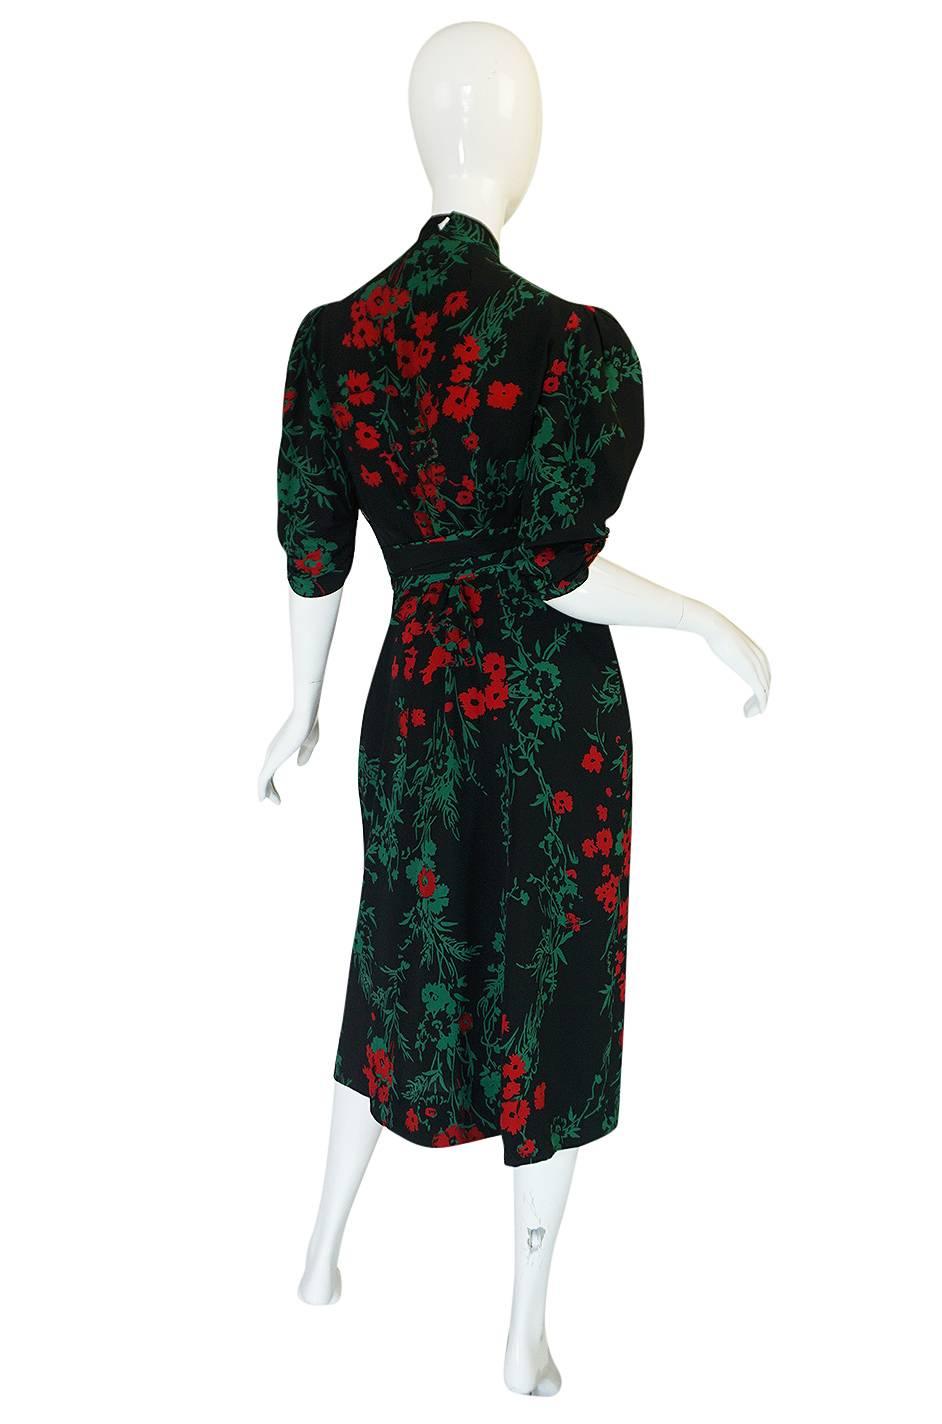 This dress is one of the best 1940s dresses I have seen and is well made and definitely higher end workmanship. It has its Fashion Originators Guild Label but no other. The Guild was formed by a group of designers, manufacturers and actual shop